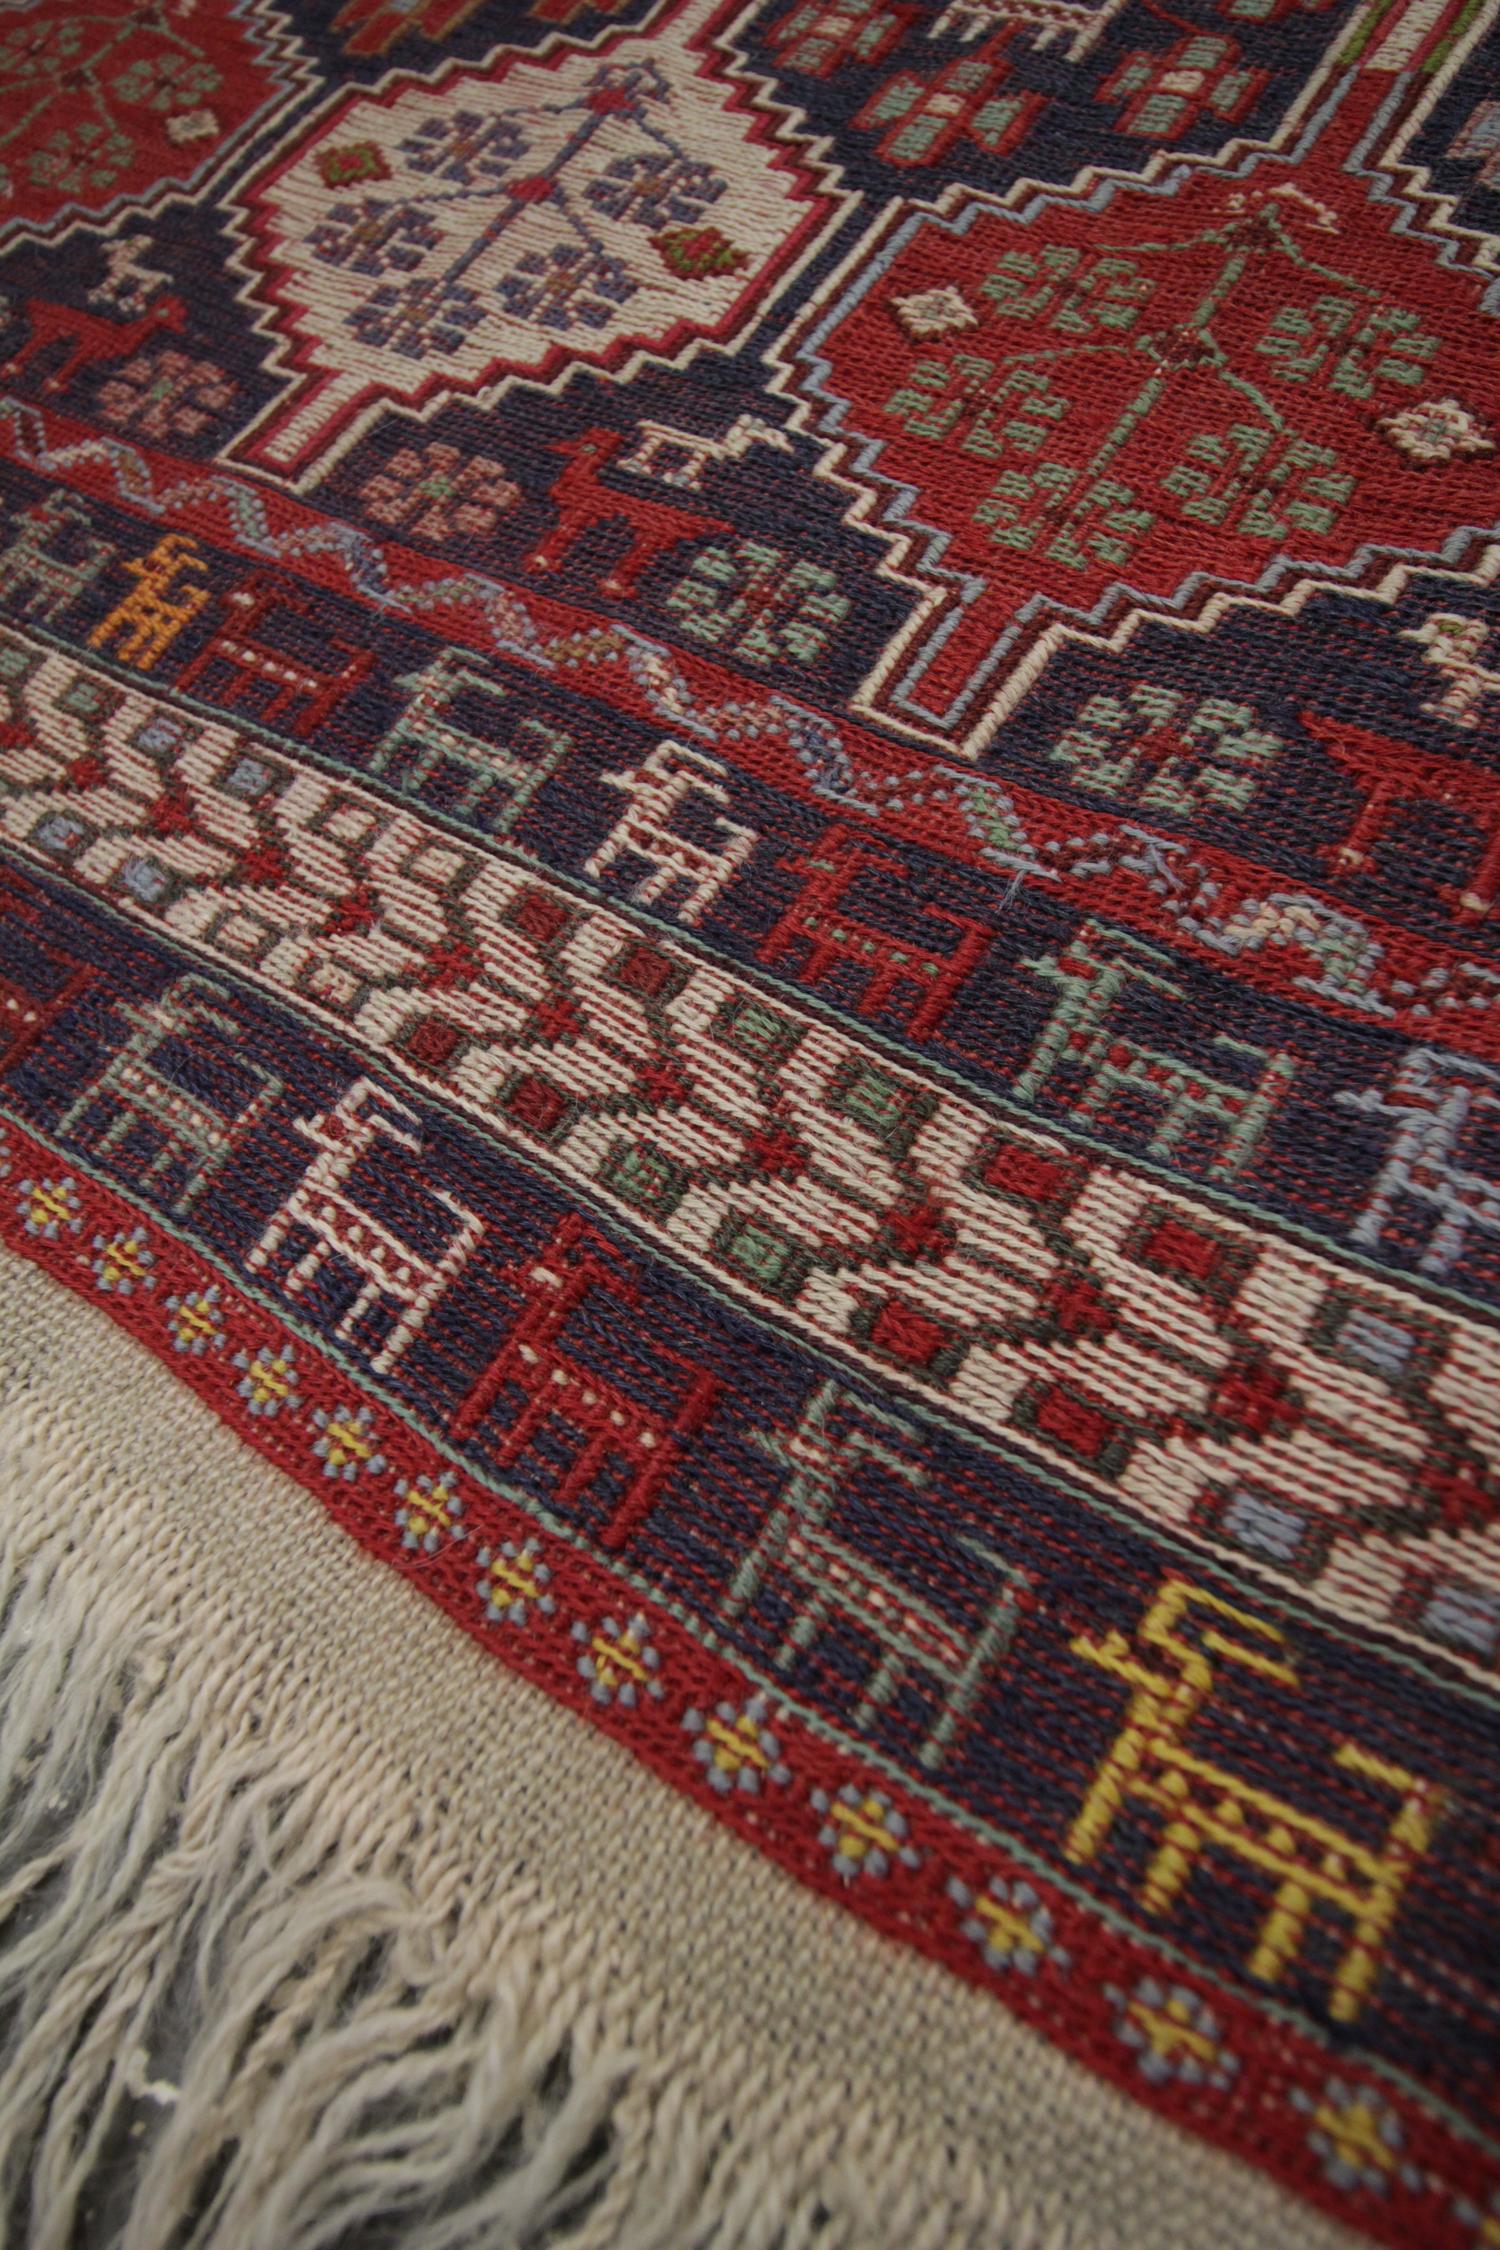 Handwoven Kilims Oriental Area Rug, Traditional Sumakh Kilim Red Wool Carpet For Sale 1